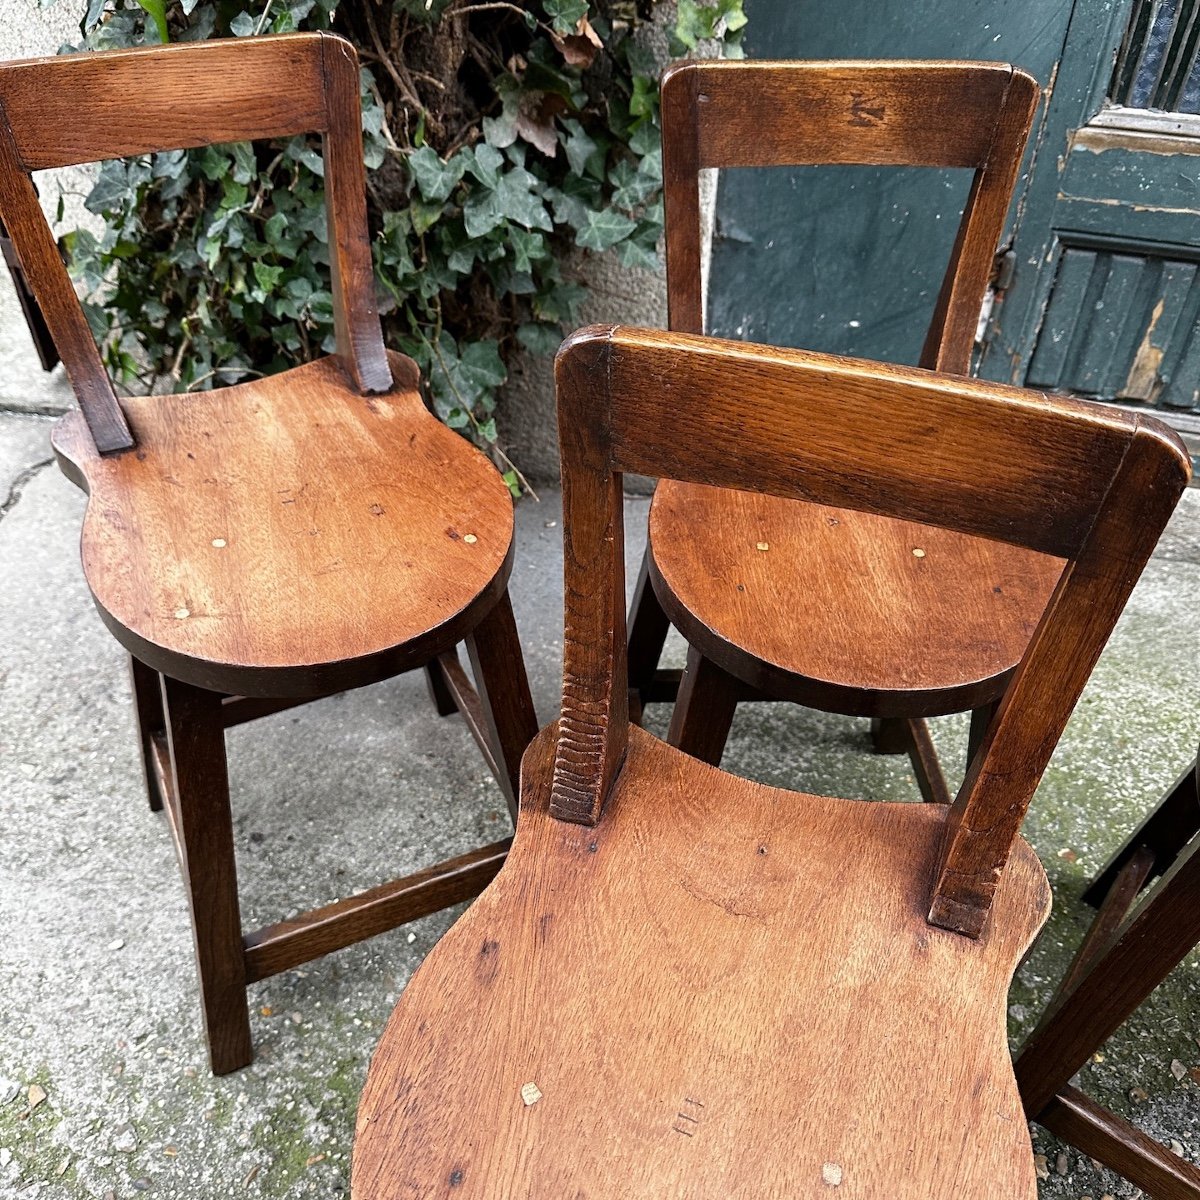 Series Of Four Chairs-photo-3